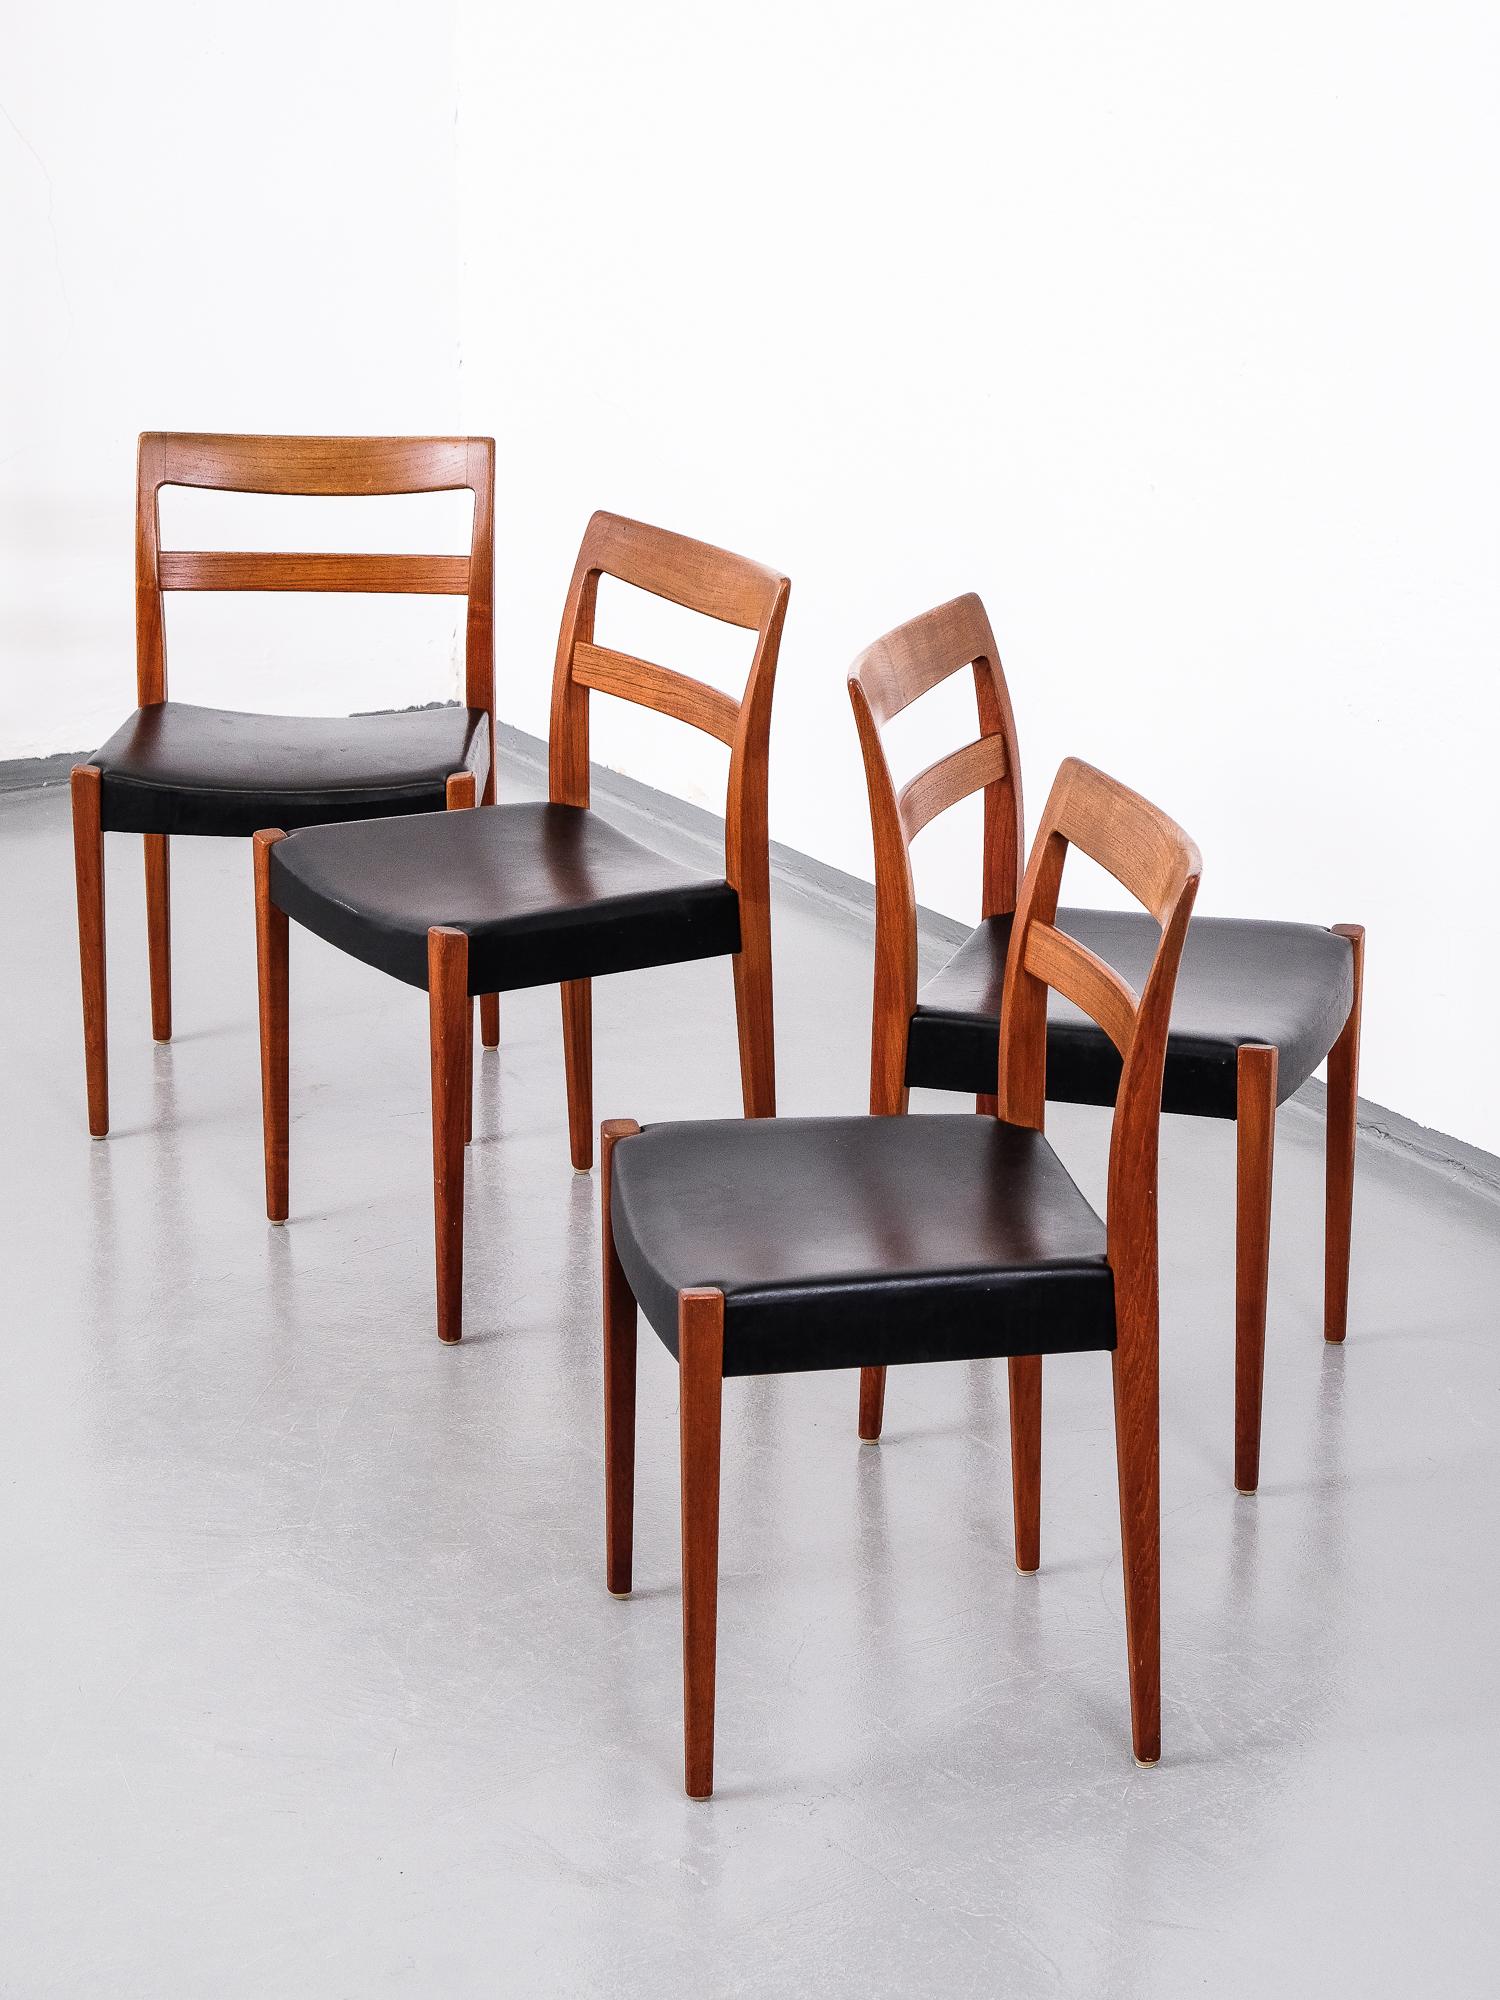 Faux Leather ”Garmi” Teak Dining Chairs by Nils Jonsson for Troeds, Set of 4